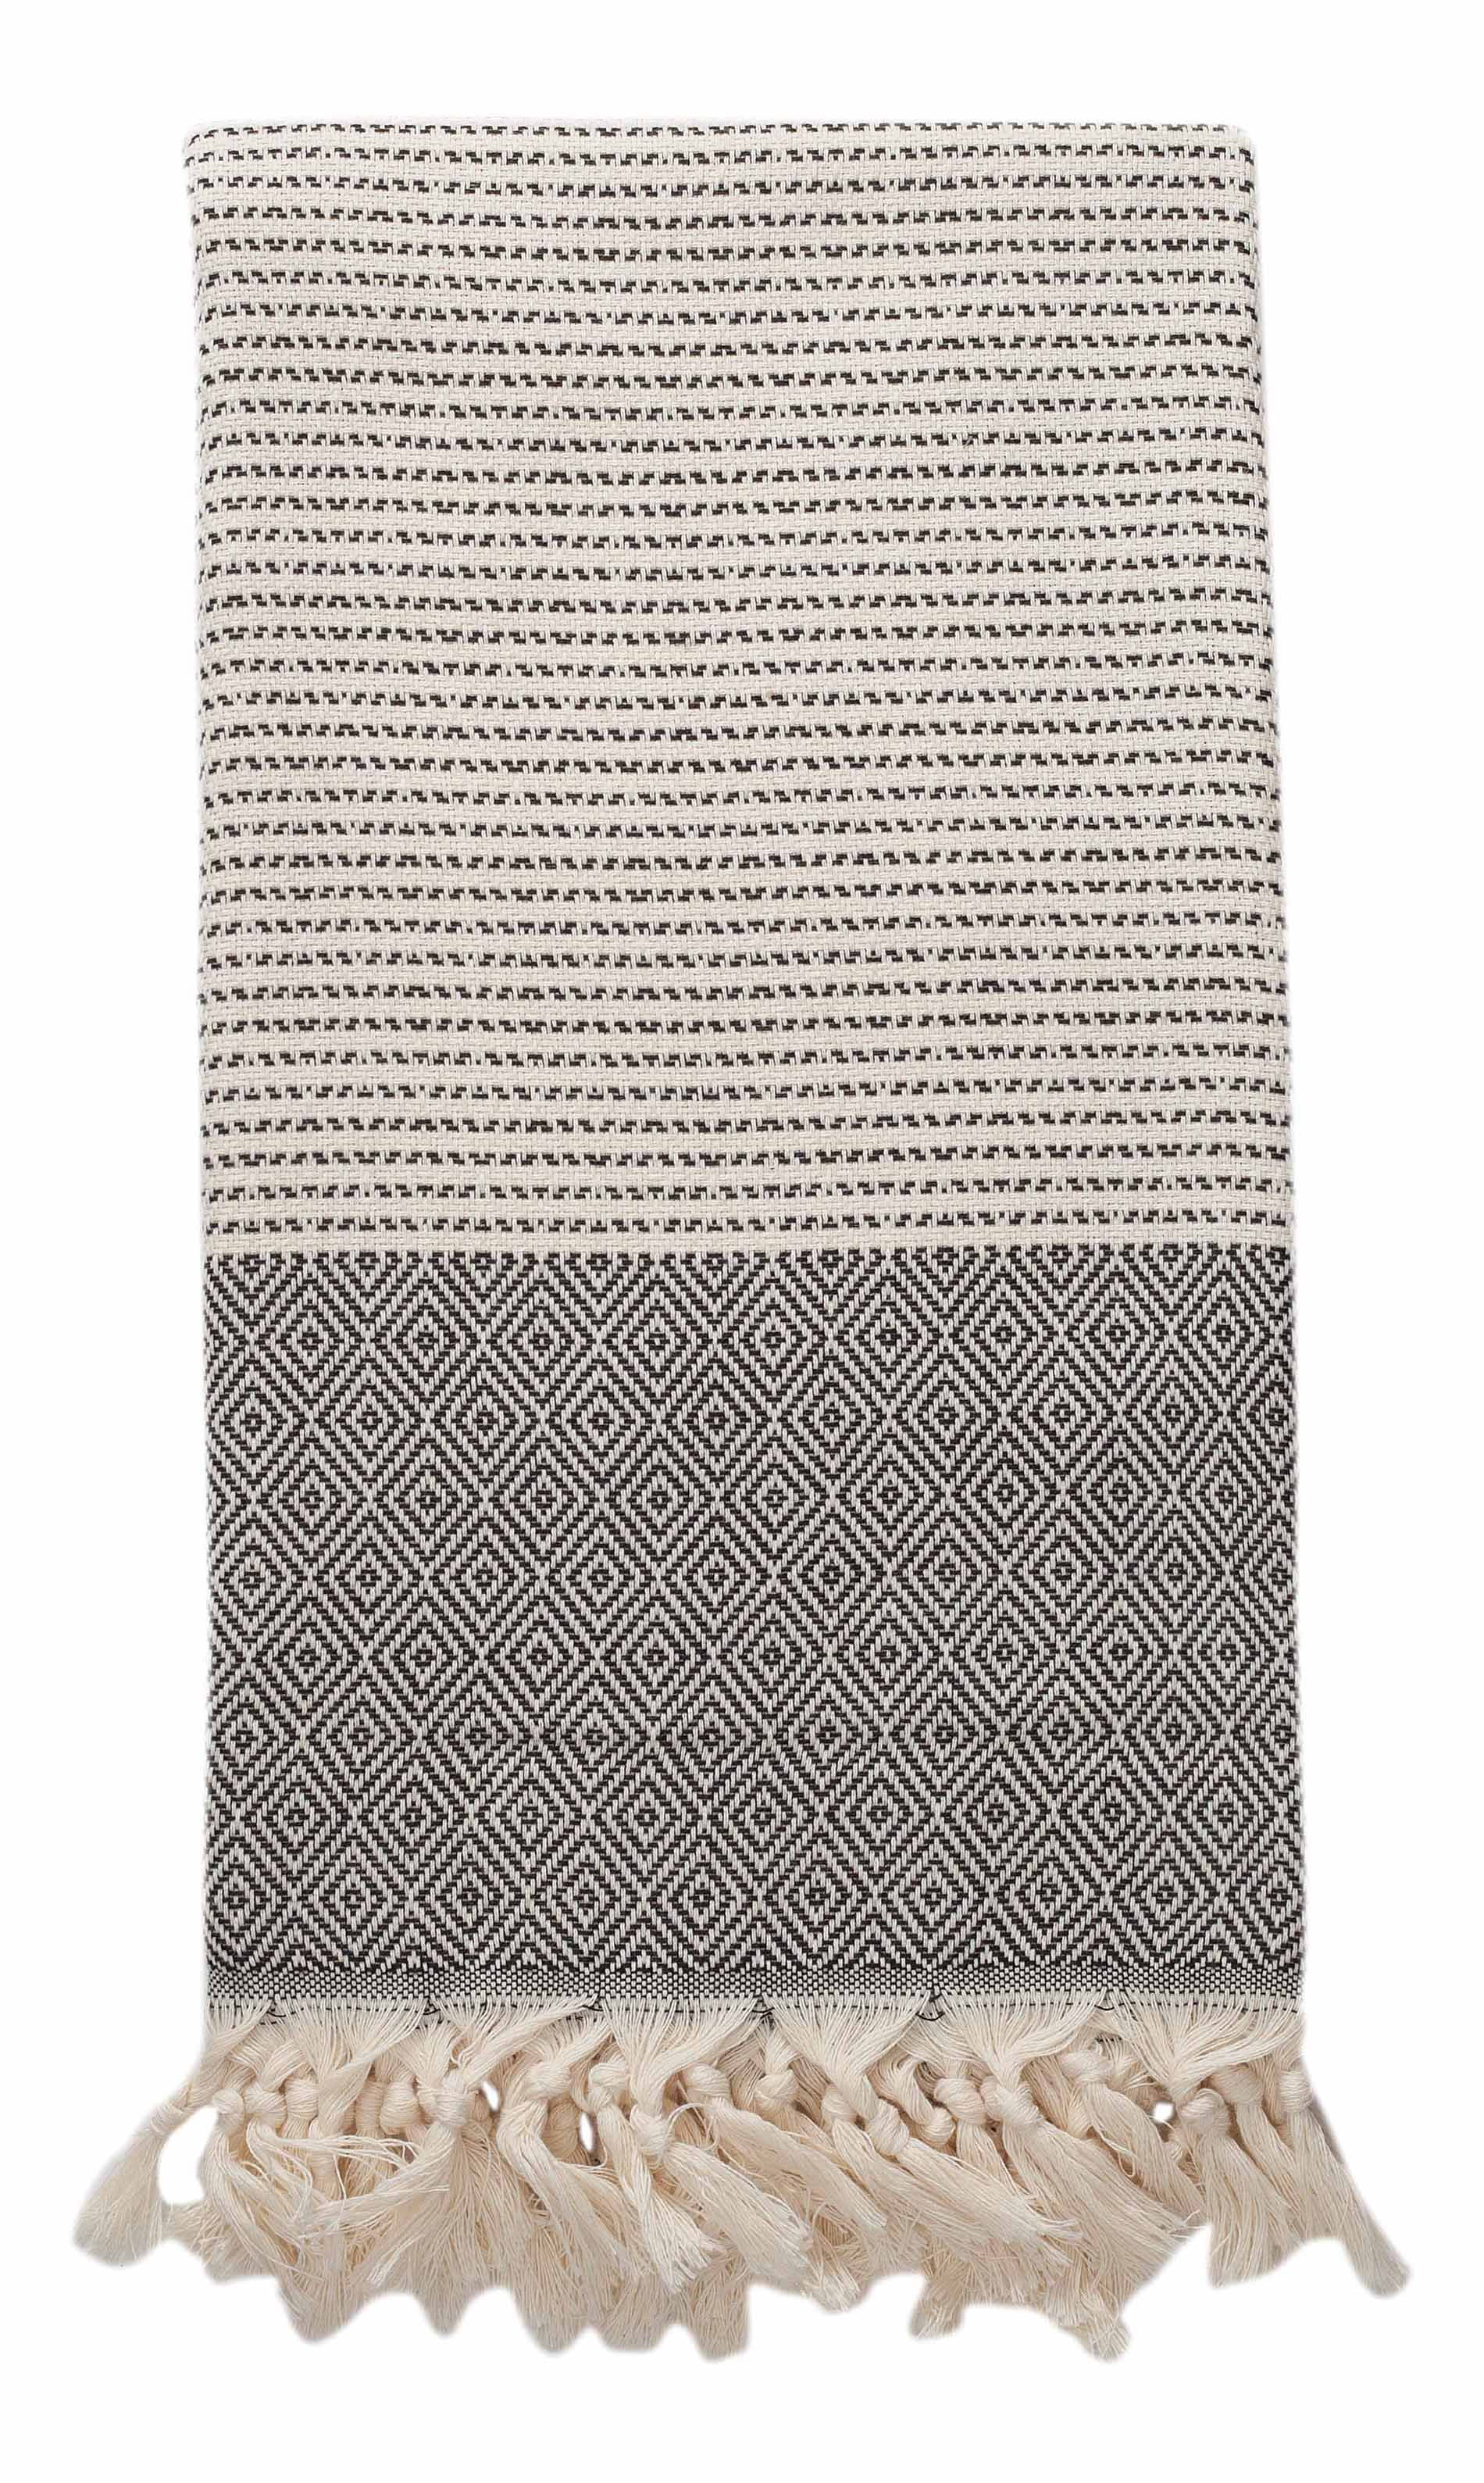 Diamond Weave Turkish Towel Peshtemal for Bath or Beach - THIN and  Lightweight - Made from 100% Turkish Cotton (Black and Cream)